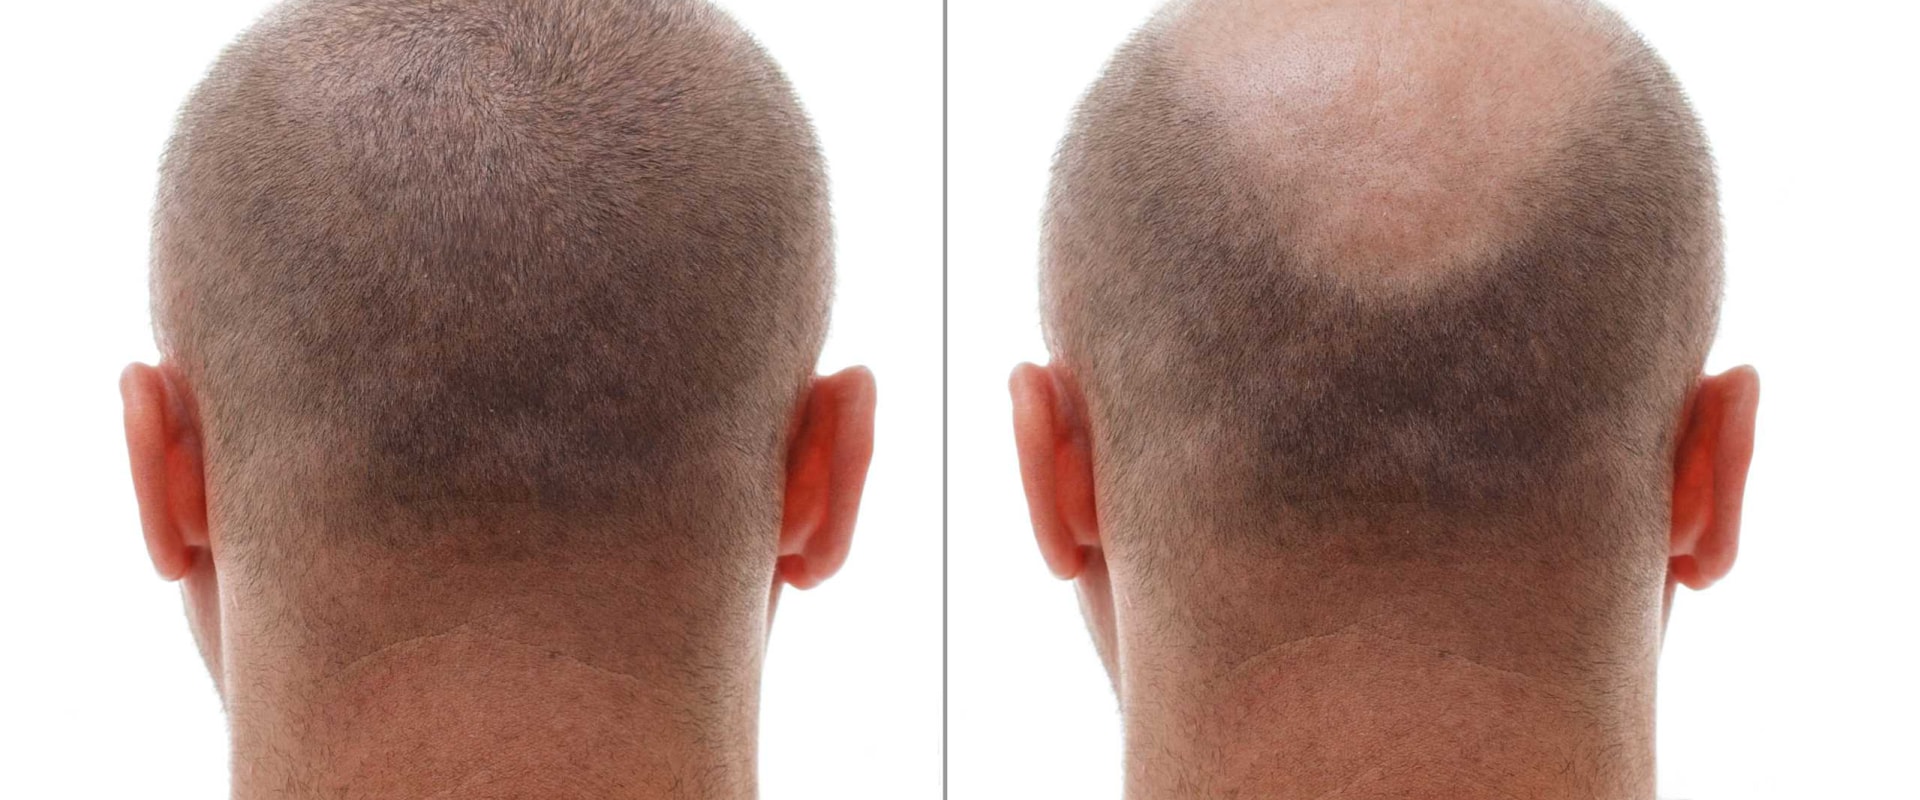 Are hair transplants guaranteed to work?